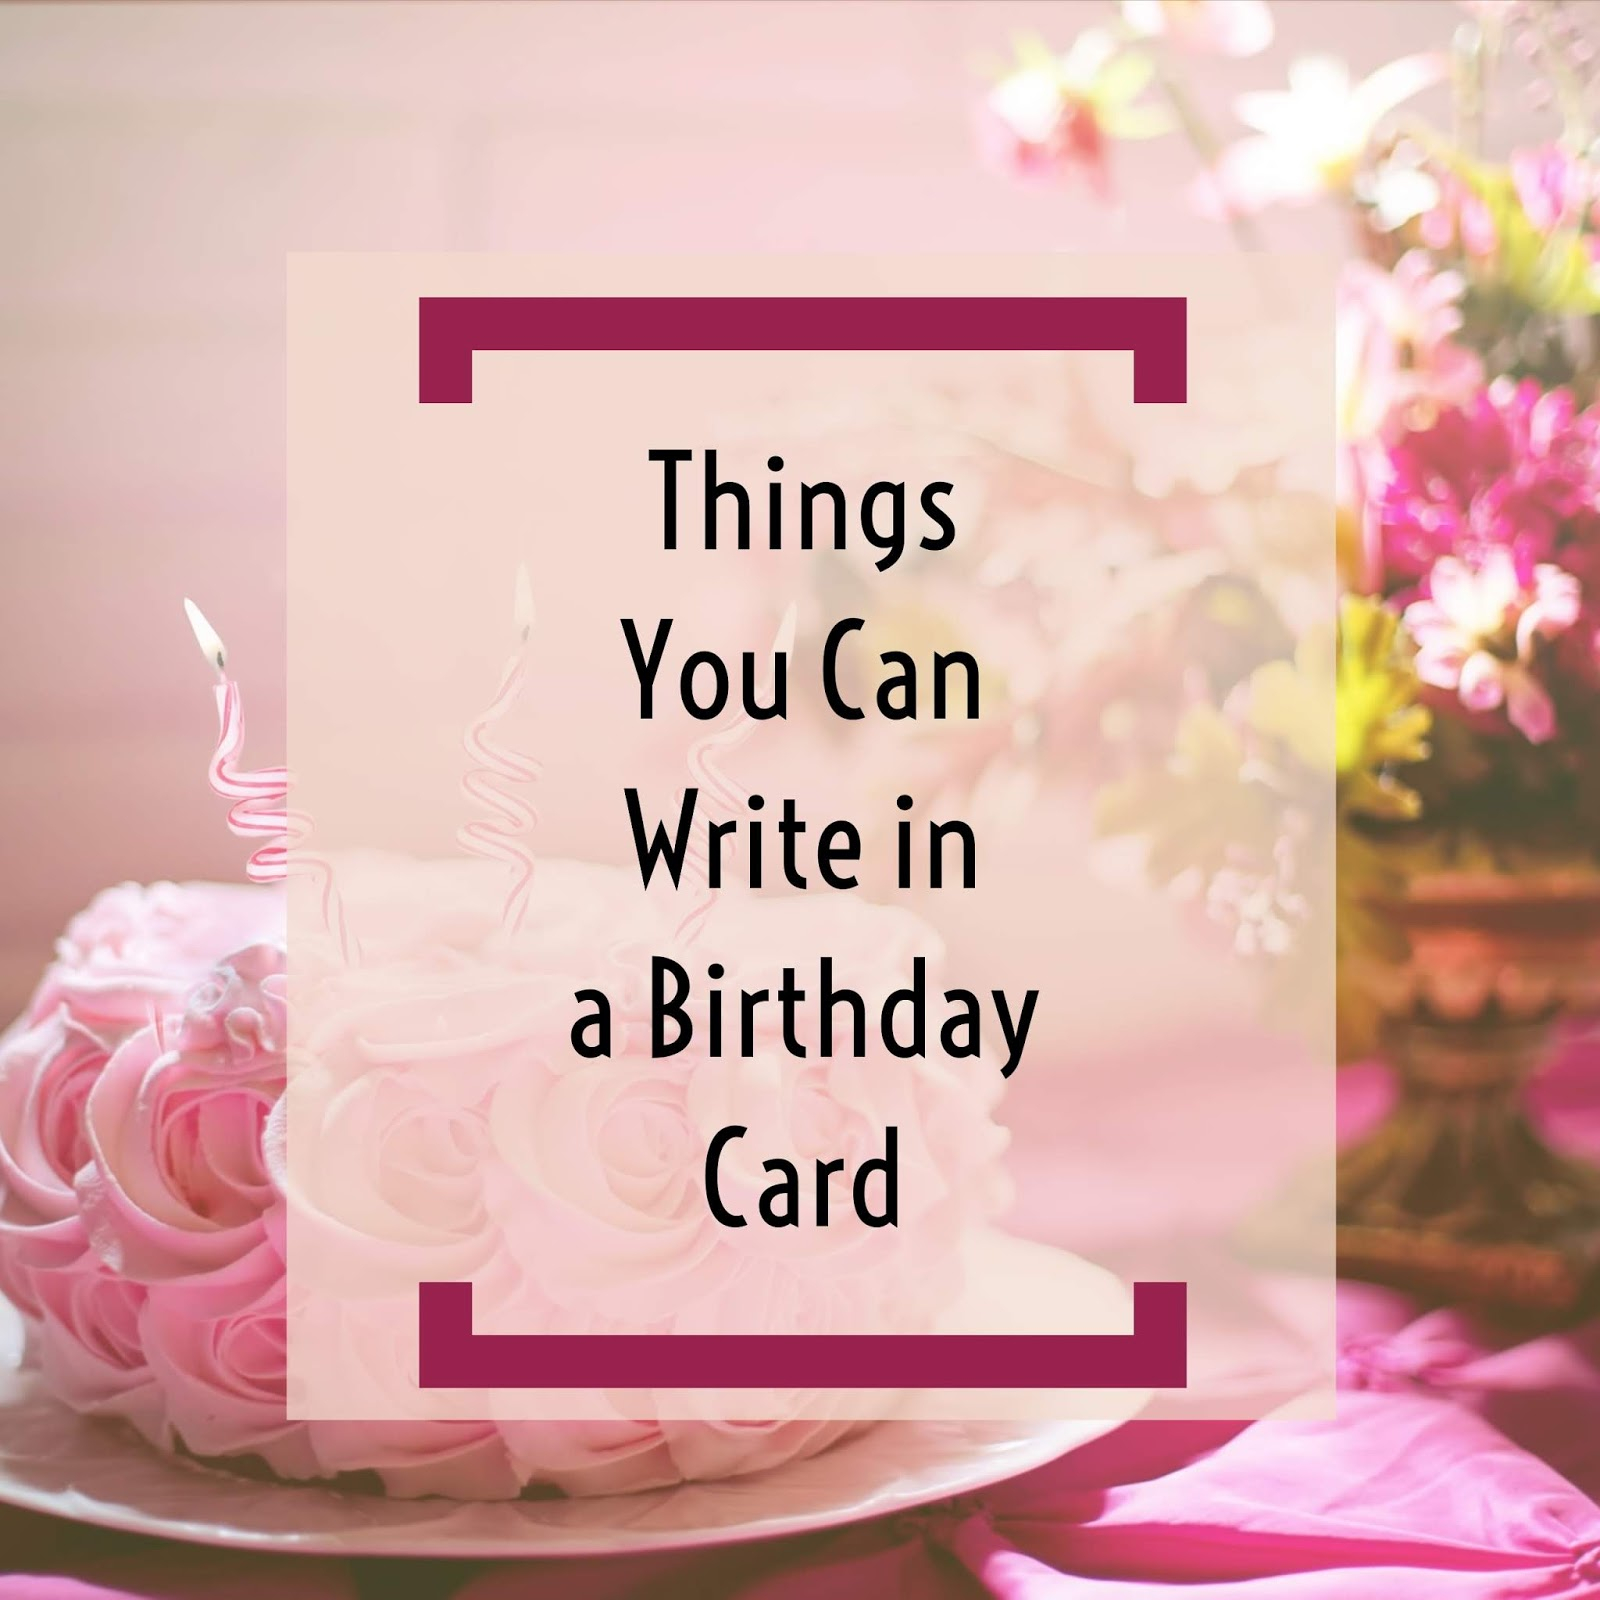 Ideas To Write In A Birthday Card When You Need Ideas On What To Write Inside A Greeting Card Check